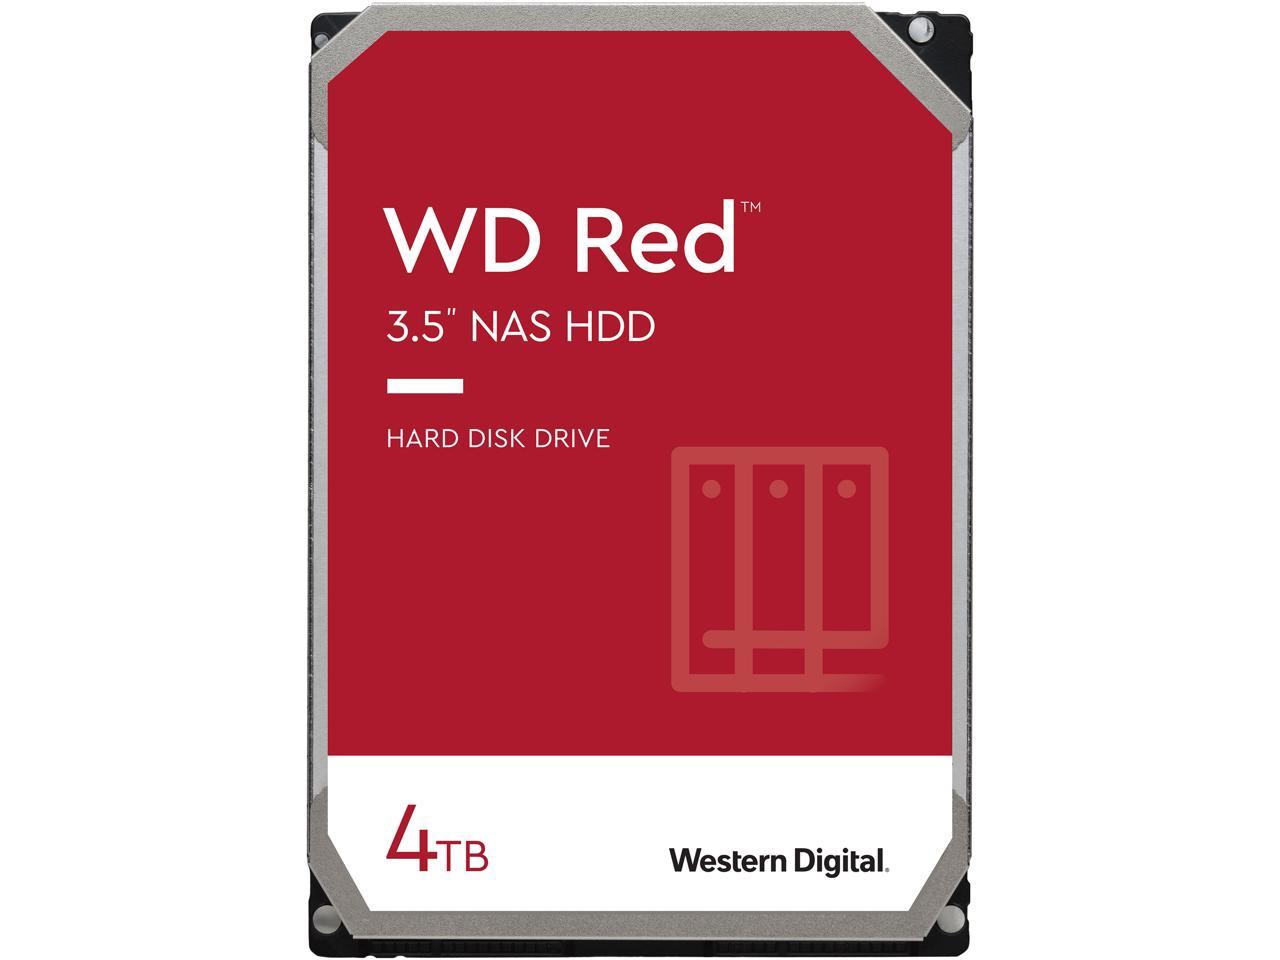 WD Red 4TB NAS 5400 RPM Drive, SATA 6Gb/s, SMR, 256MB Cache, 3.5", WD40EFAX, $65.99 shipped